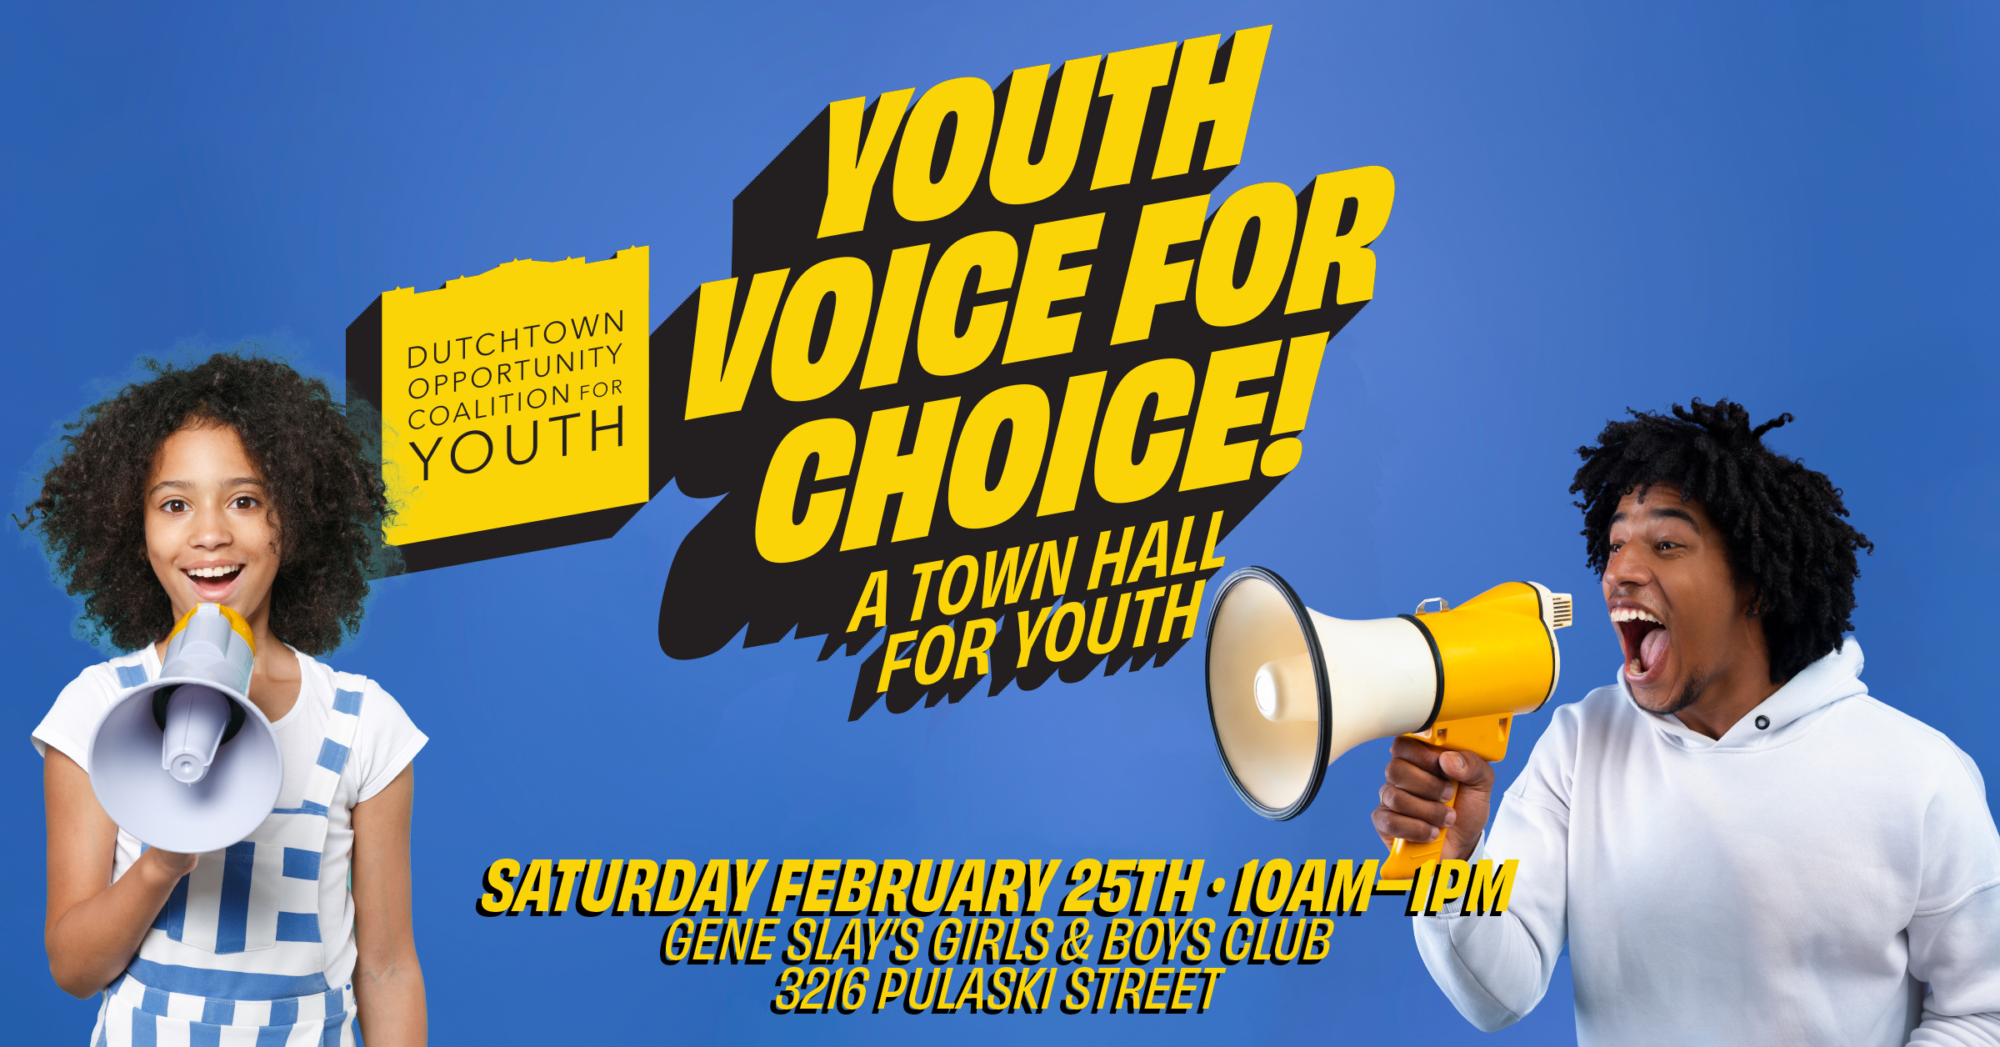 DOCY's Youth Voice for Choice event on February 25th at Gene Slay's Girls and Boys Club in Dutchtown.